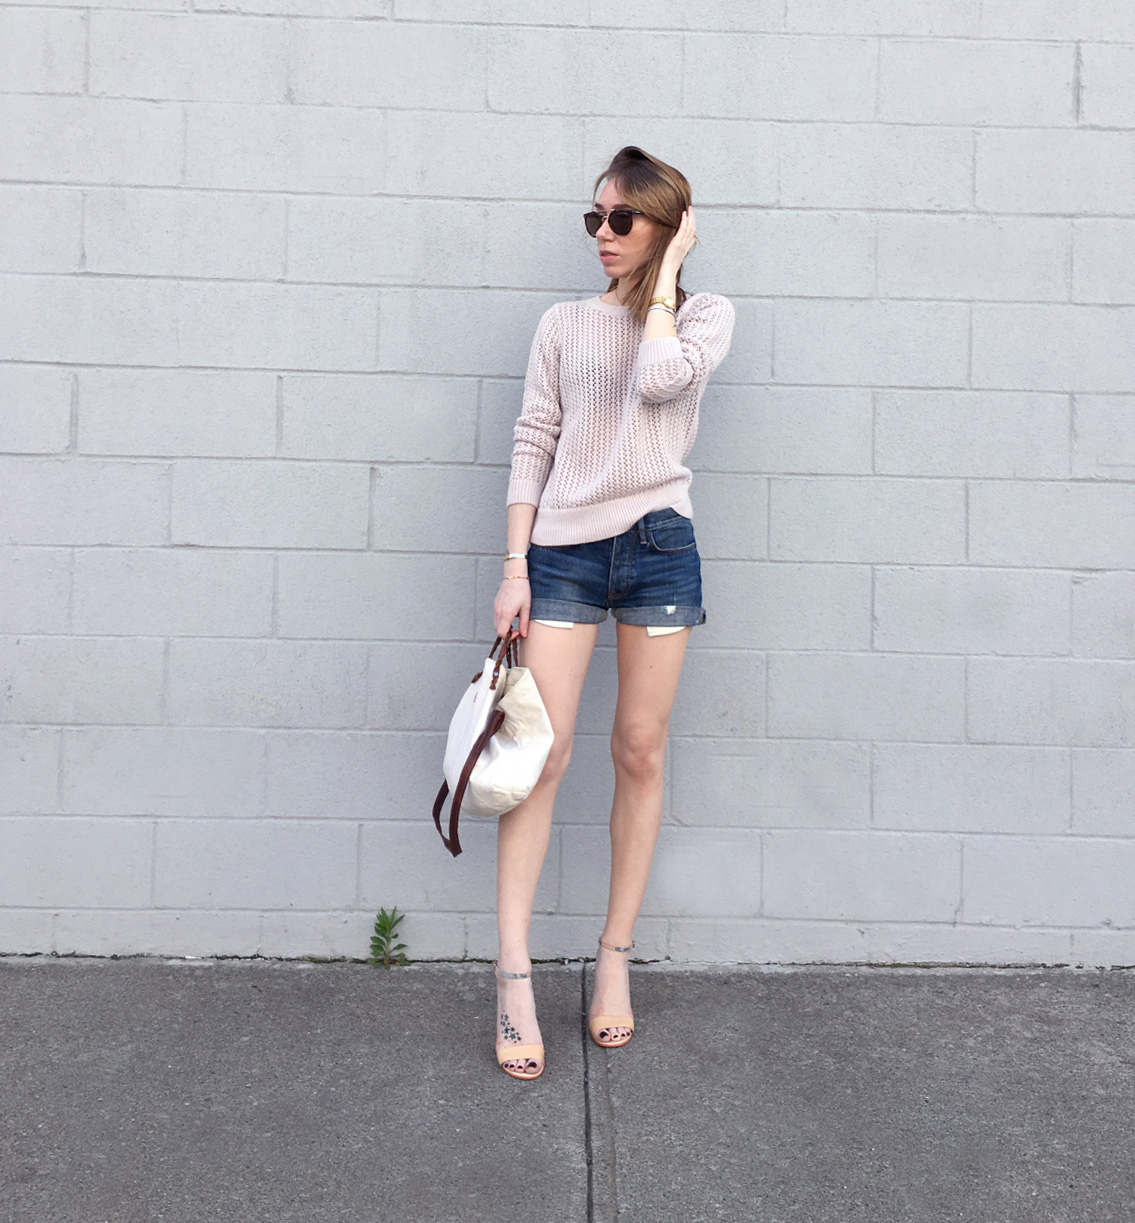 Pink sweater with denim shorts outfit